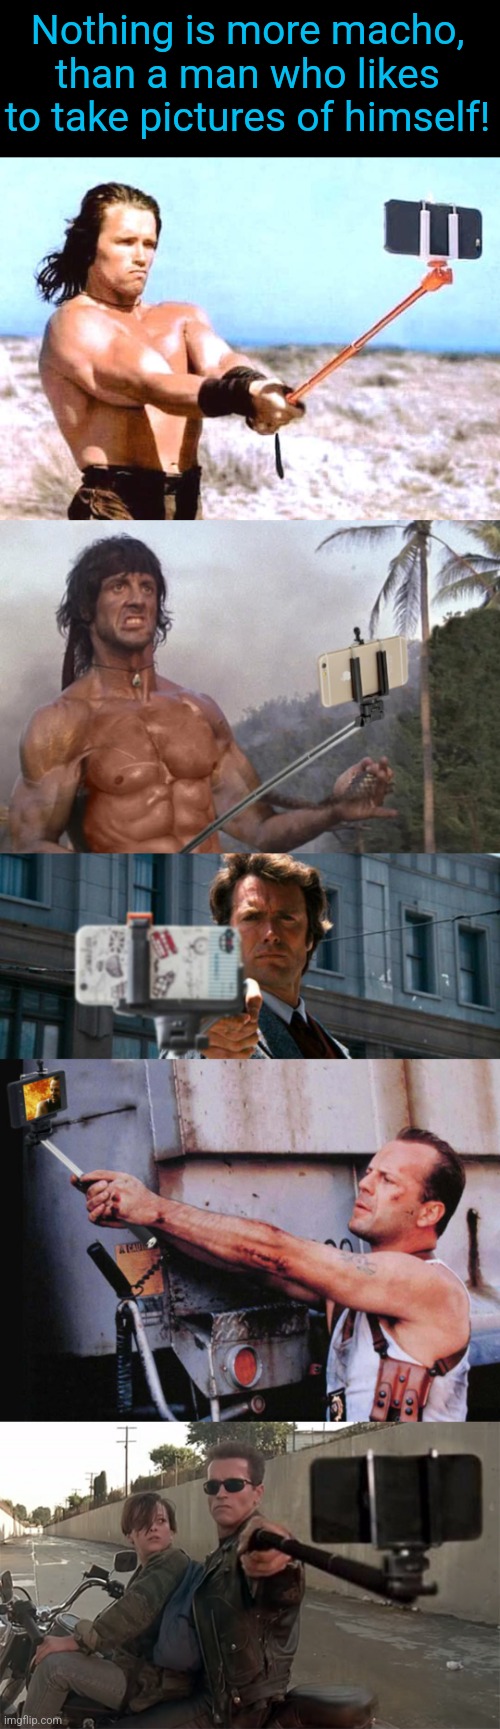 Macho Selfie Men | Nothing is more macho, than a man who likes to take pictures of himself! | image tagged in conan the barbarian,rambo,dirty harry,die hard,terminator 2,selfie stick | made w/ Imgflip meme maker